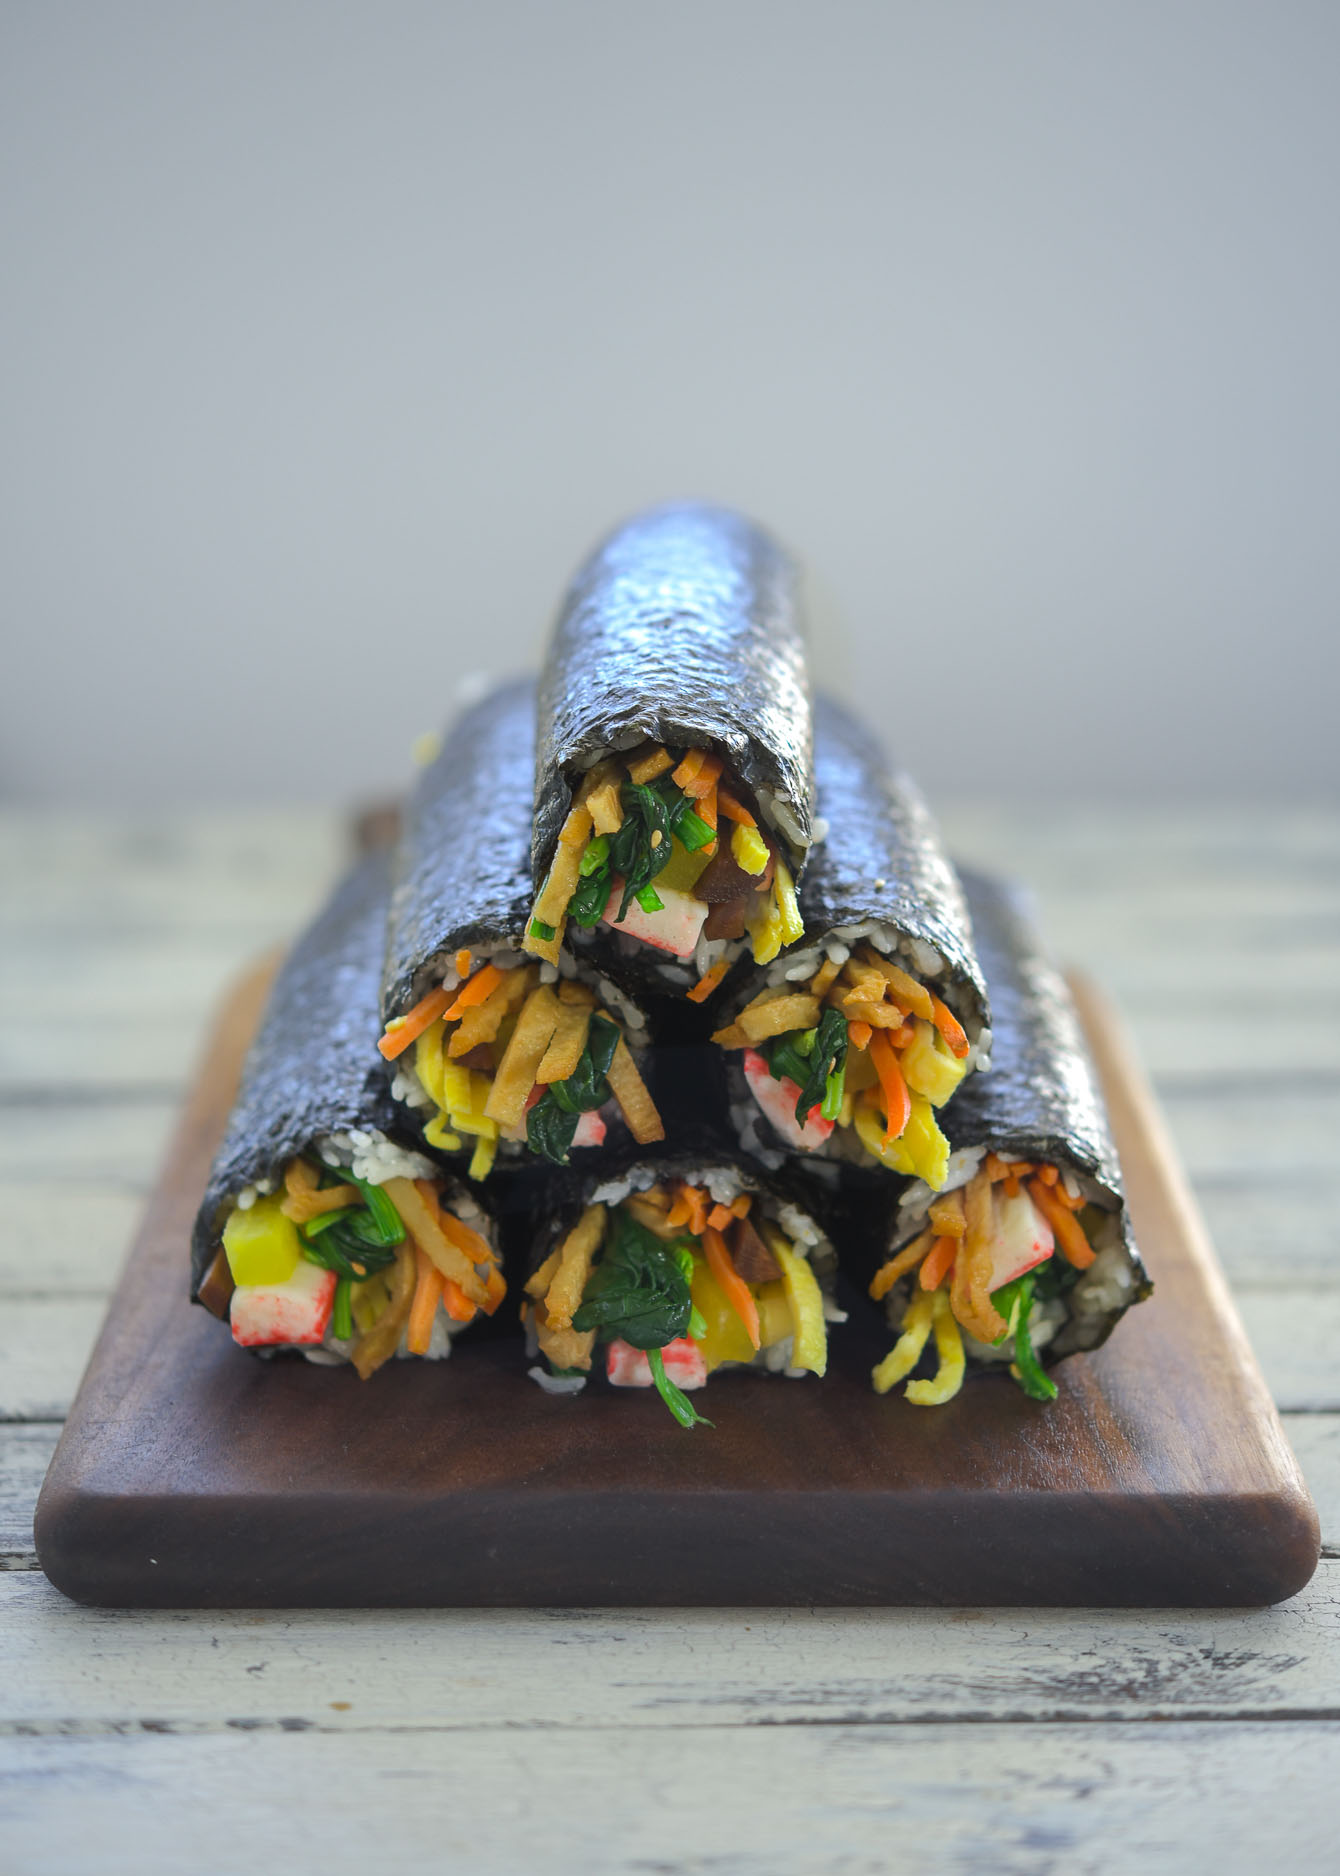 Korean seaweed rice rolls stacked together on a wooden board.